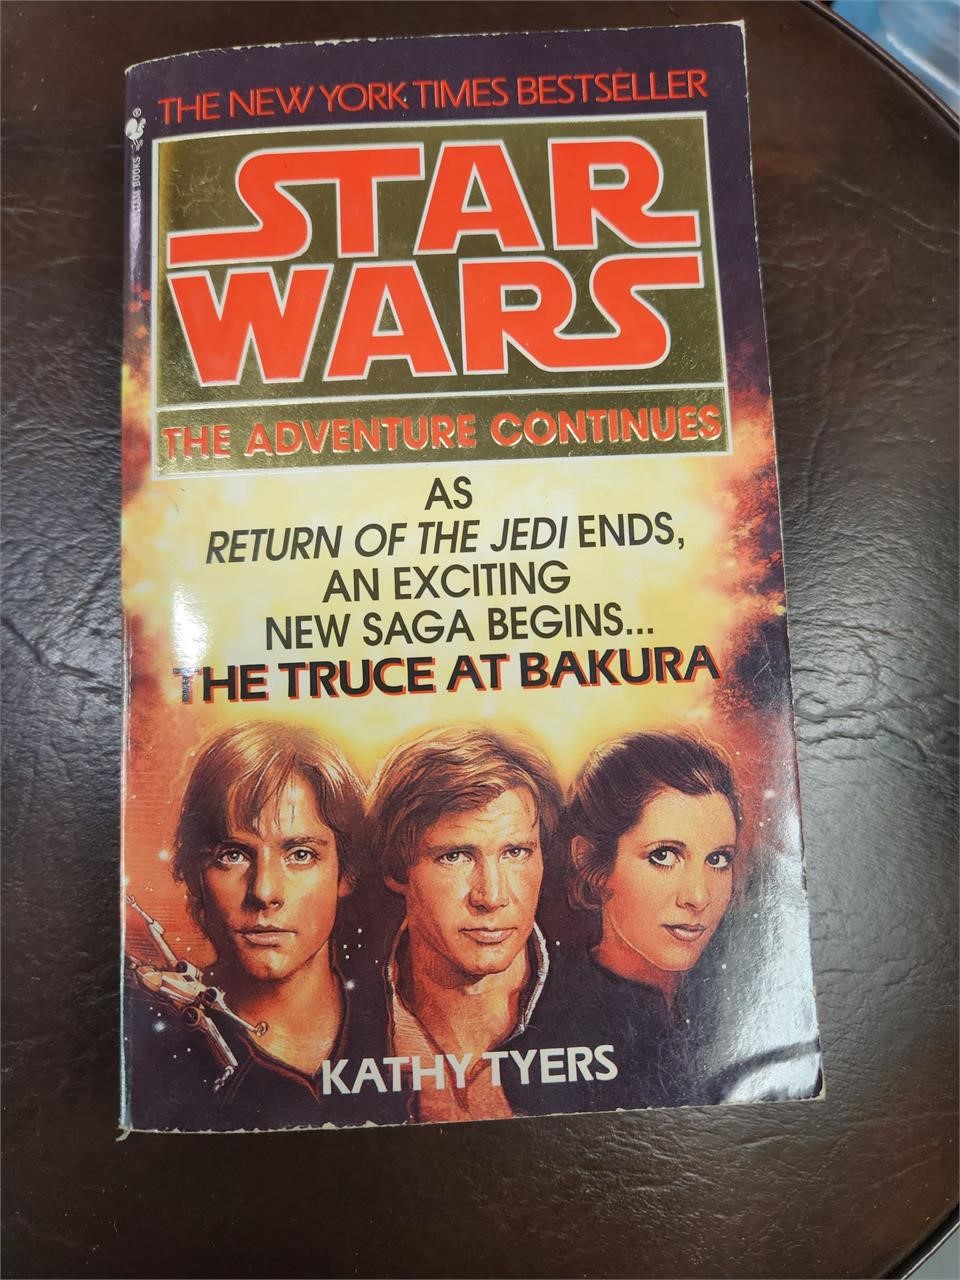 Star Wars the Adventure Continues book